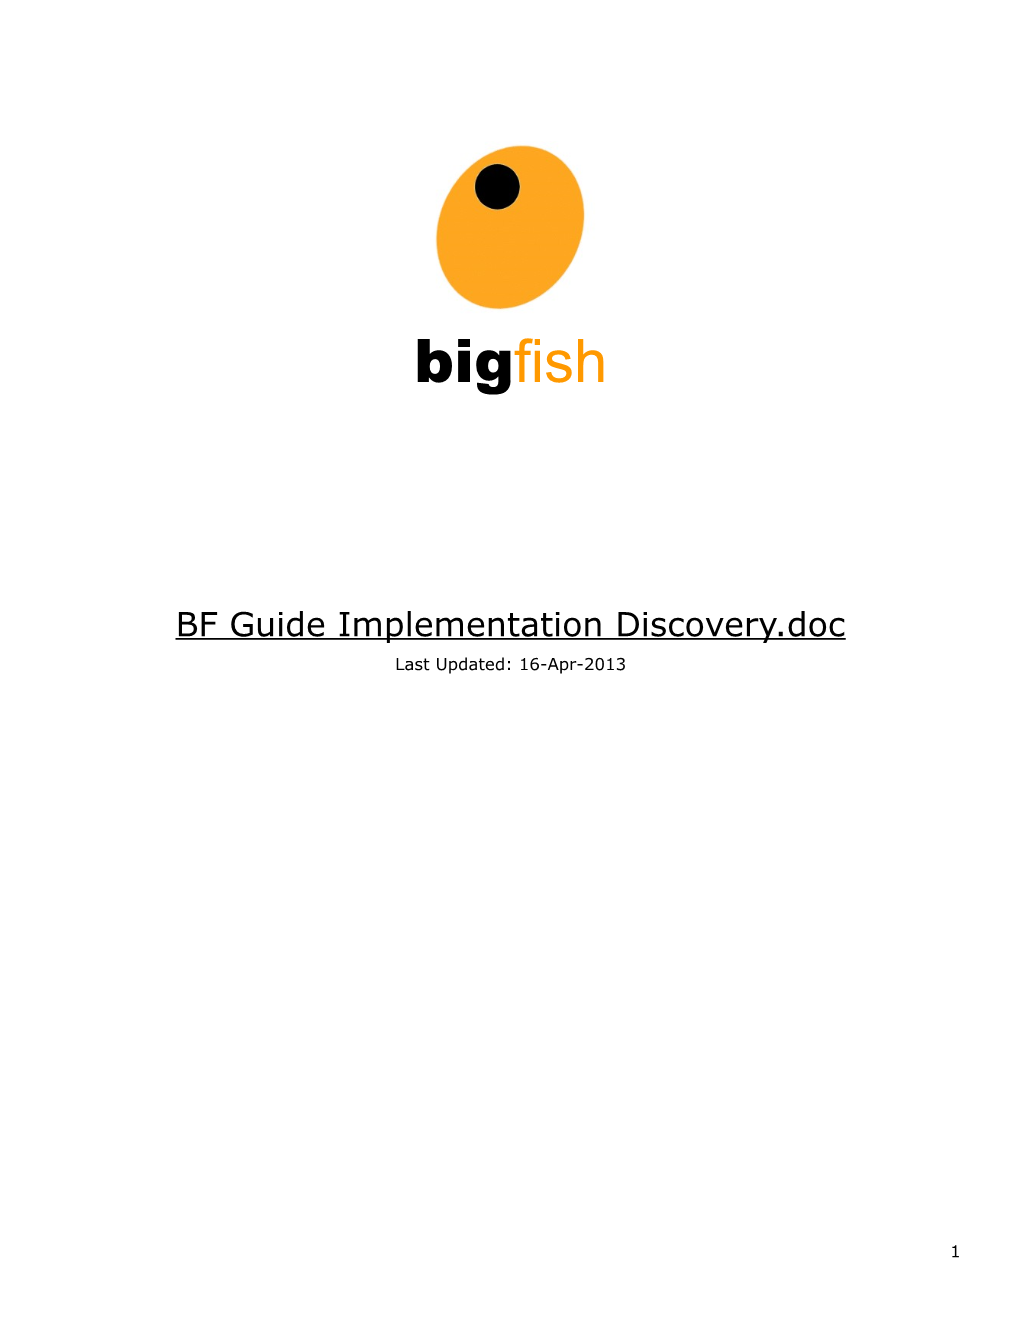 BF Guide Implementation Discovery